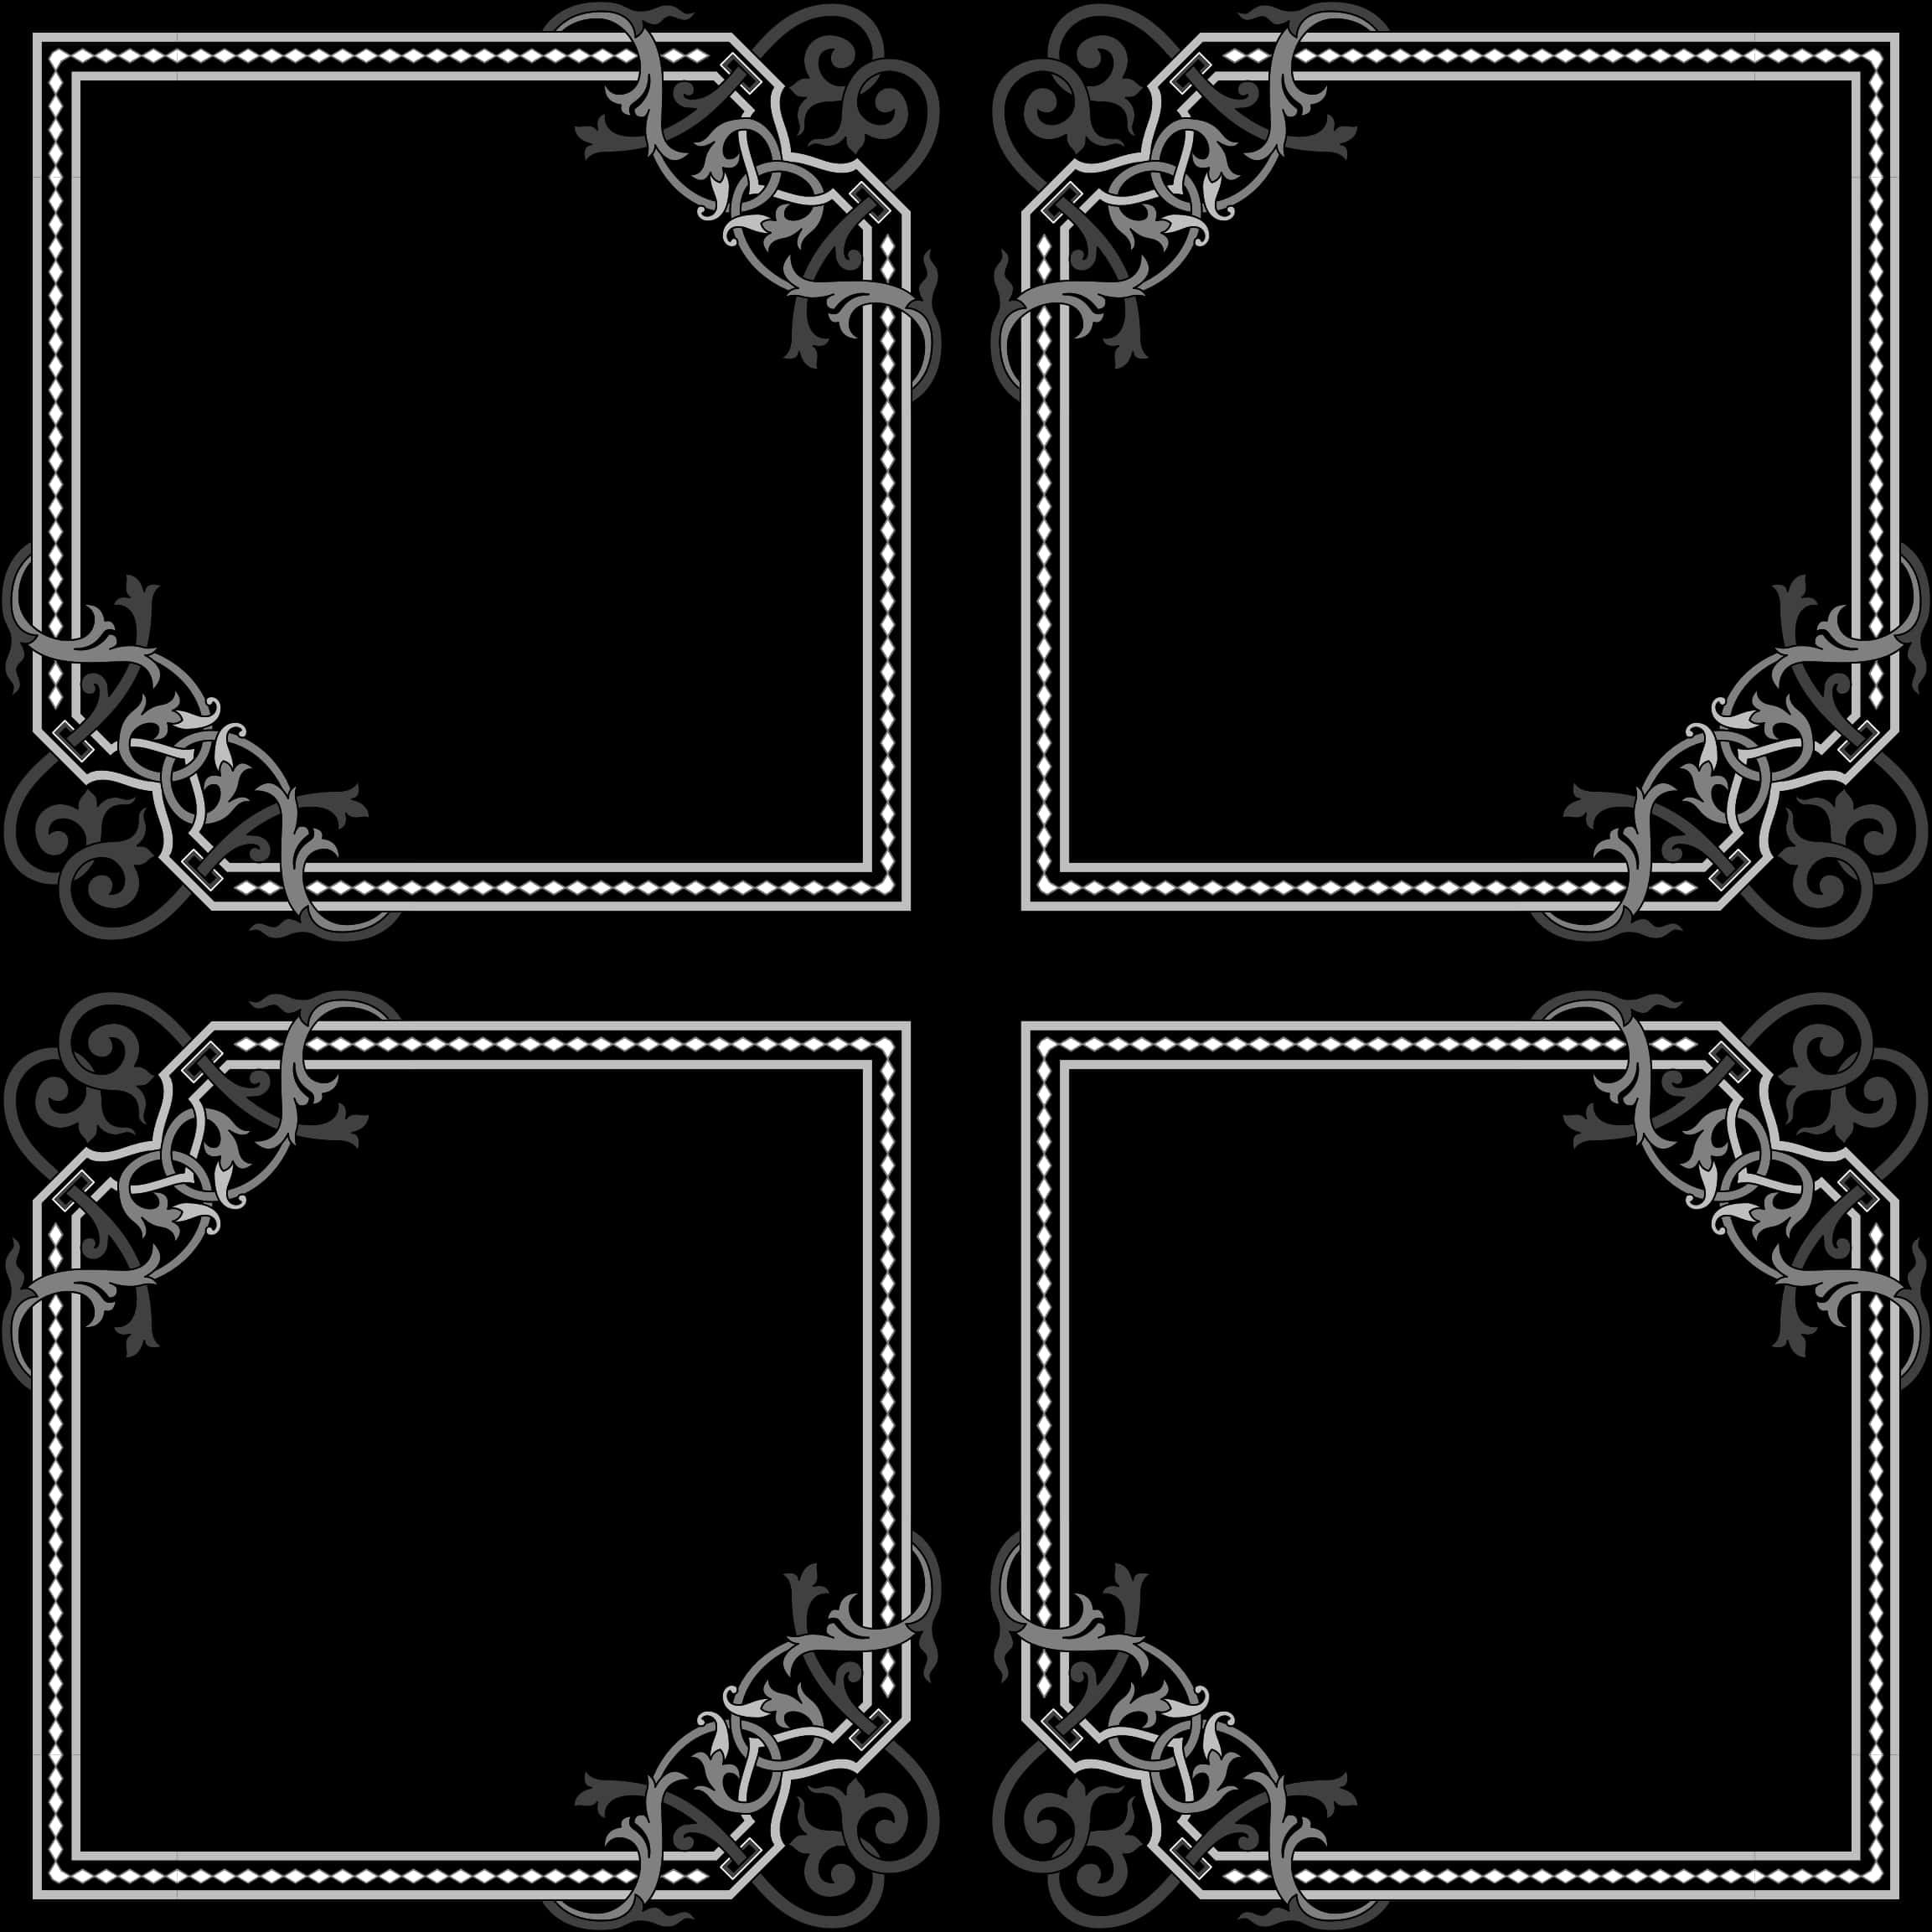 A Black And White Square Frame